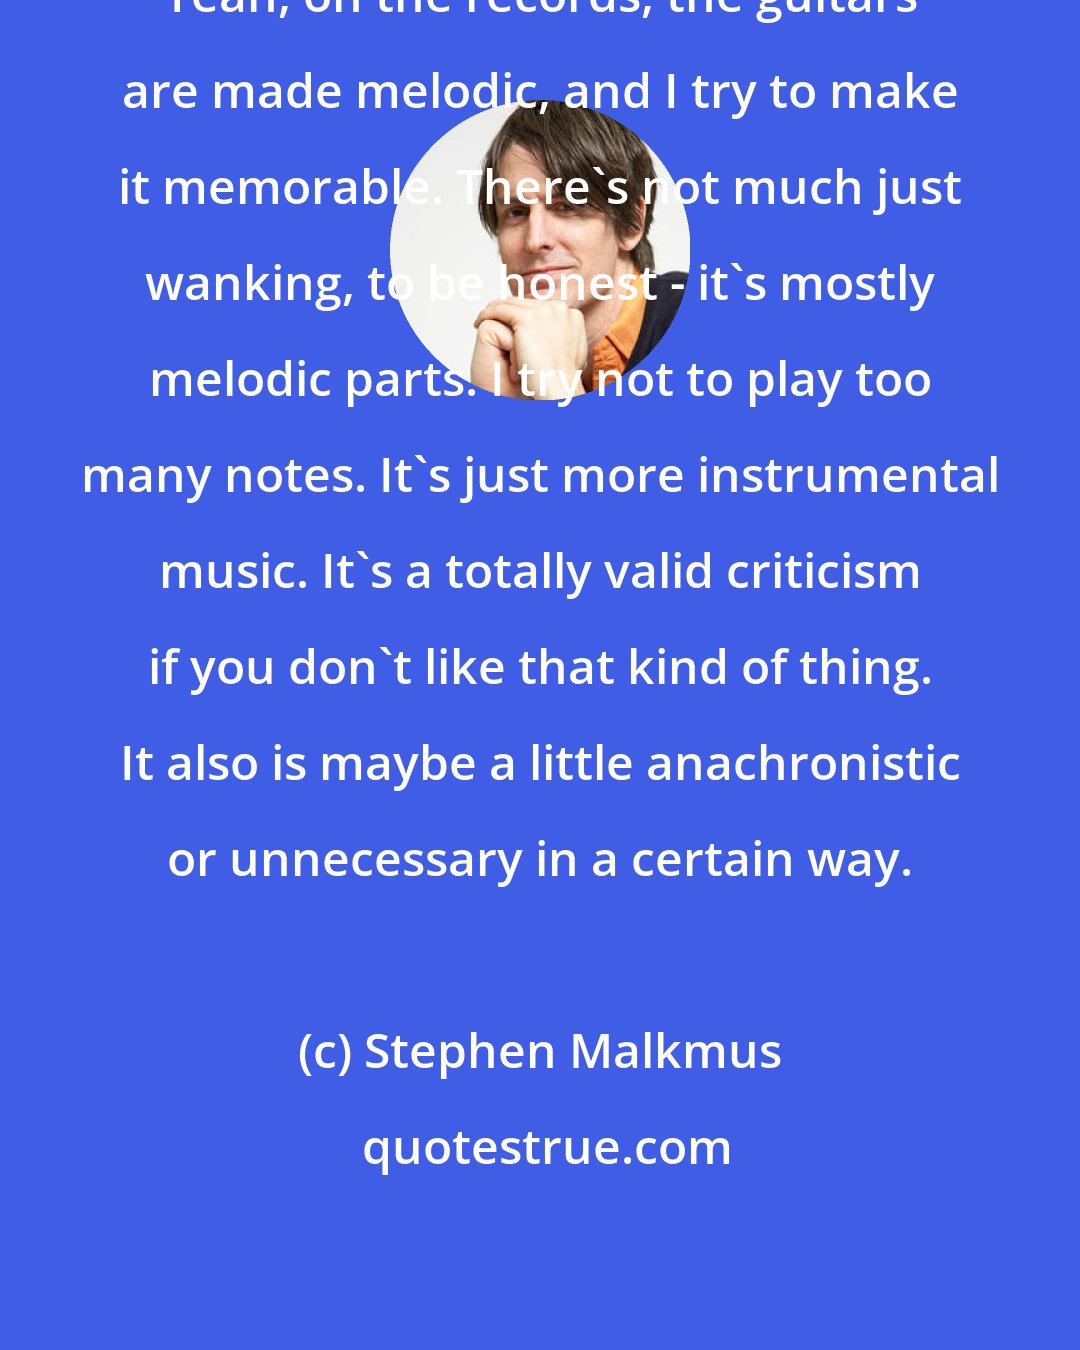 Stephen Malkmus: Yeah, on the records, the guitars are made melodic, and I try to make it memorable. There's not much just wanking, to be honest - it's mostly melodic parts. I try not to play too many notes. It's just more instrumental music. It's a totally valid criticism if you don't like that kind of thing. It also is maybe a little anachronistic or unnecessary in a certain way.